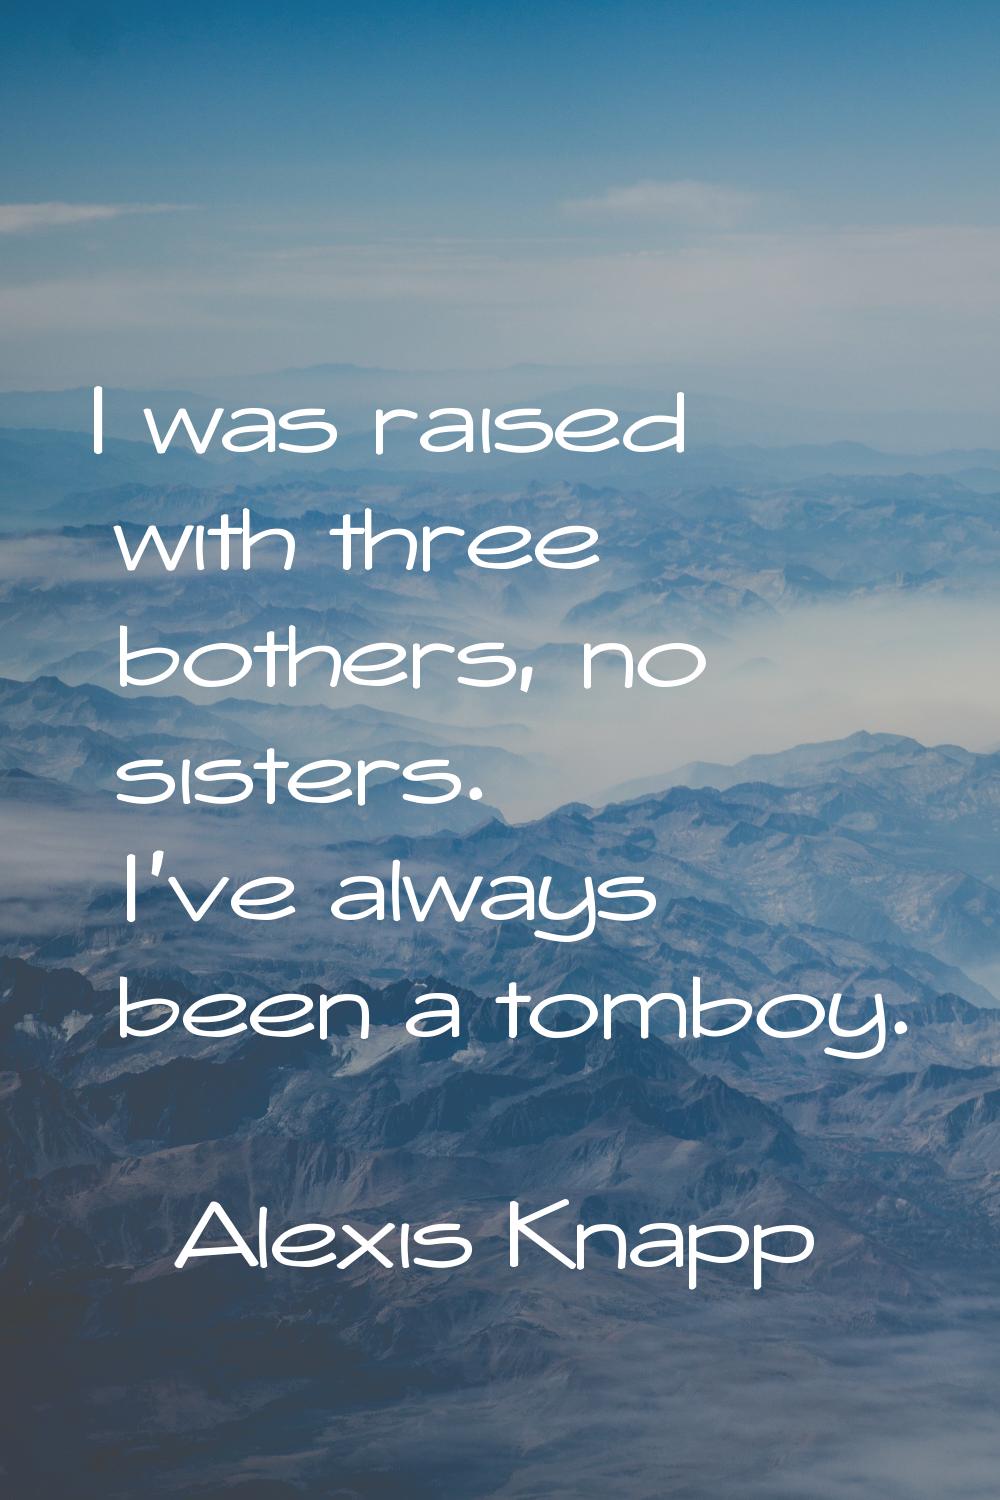 I was raised with three bothers, no sisters. I've always been a tomboy.